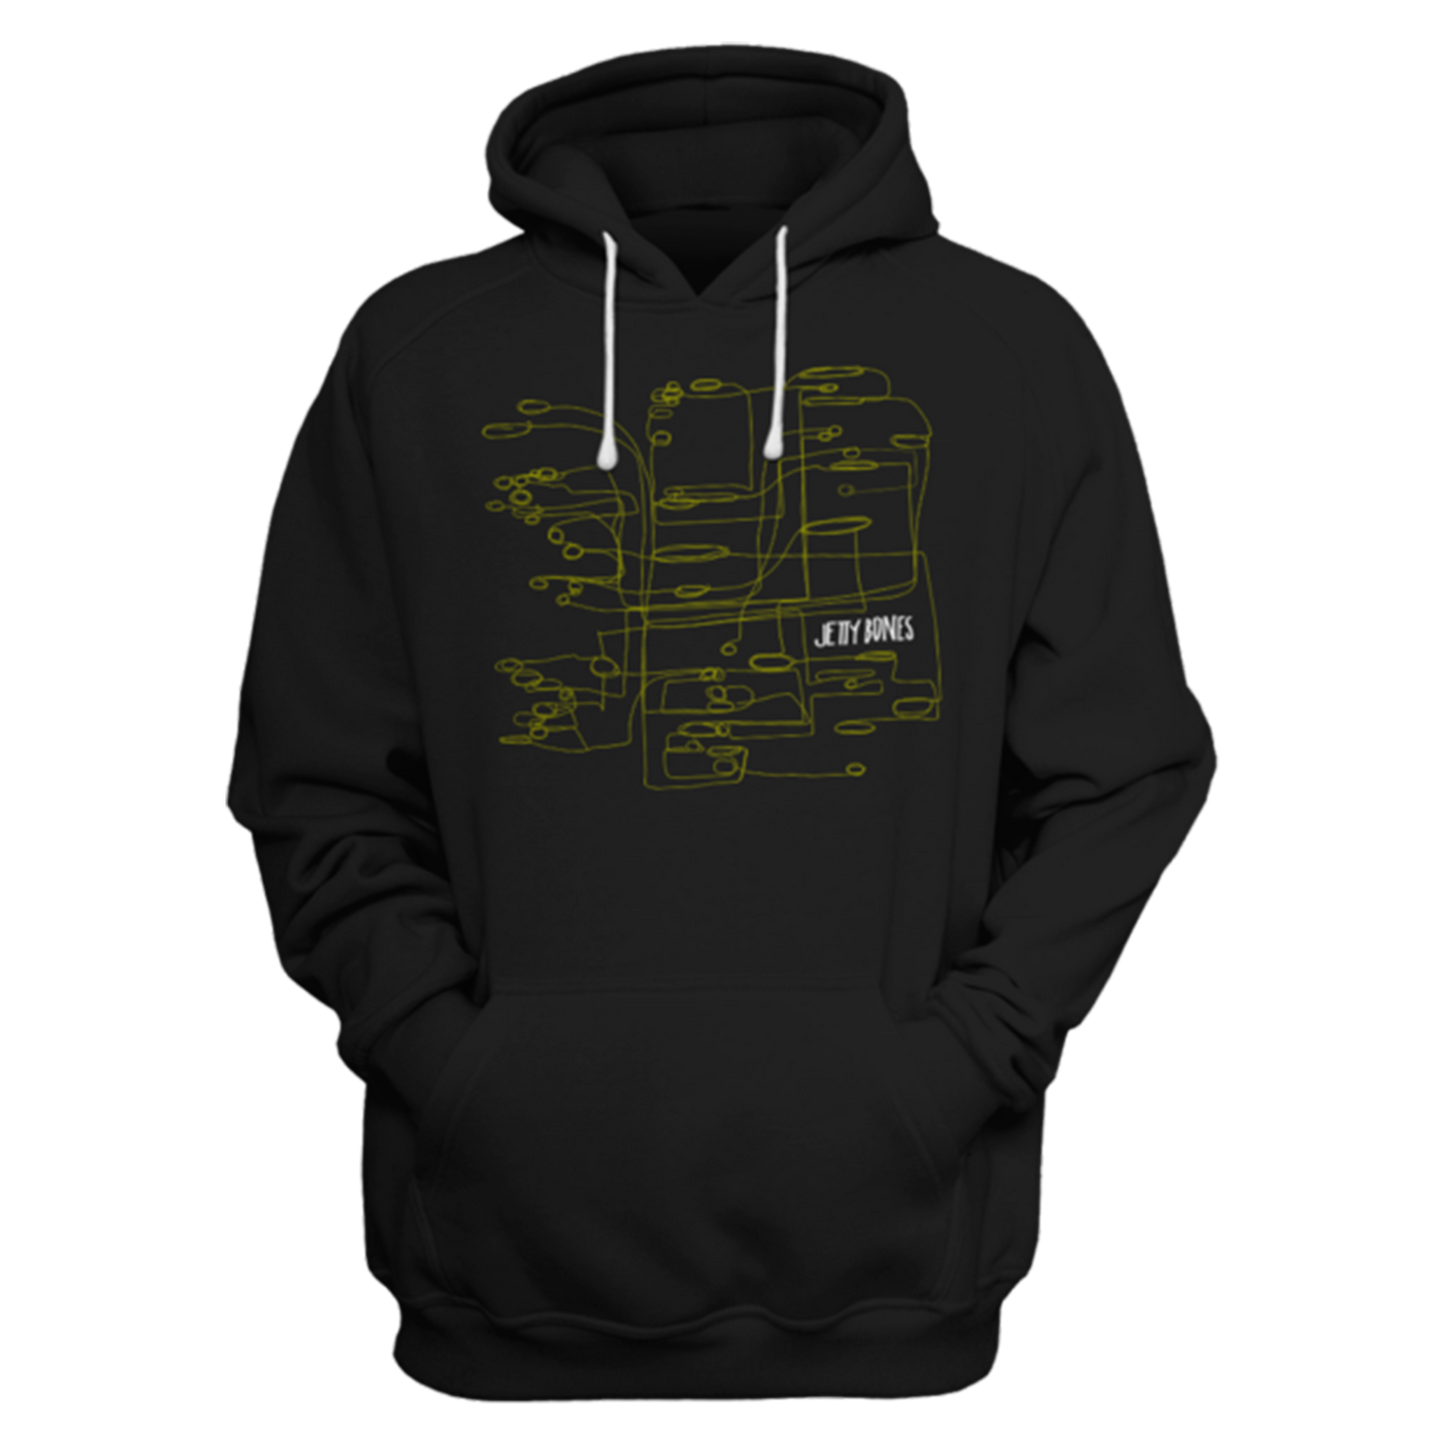 Jetty Bones - "Thought Map" Hoodie